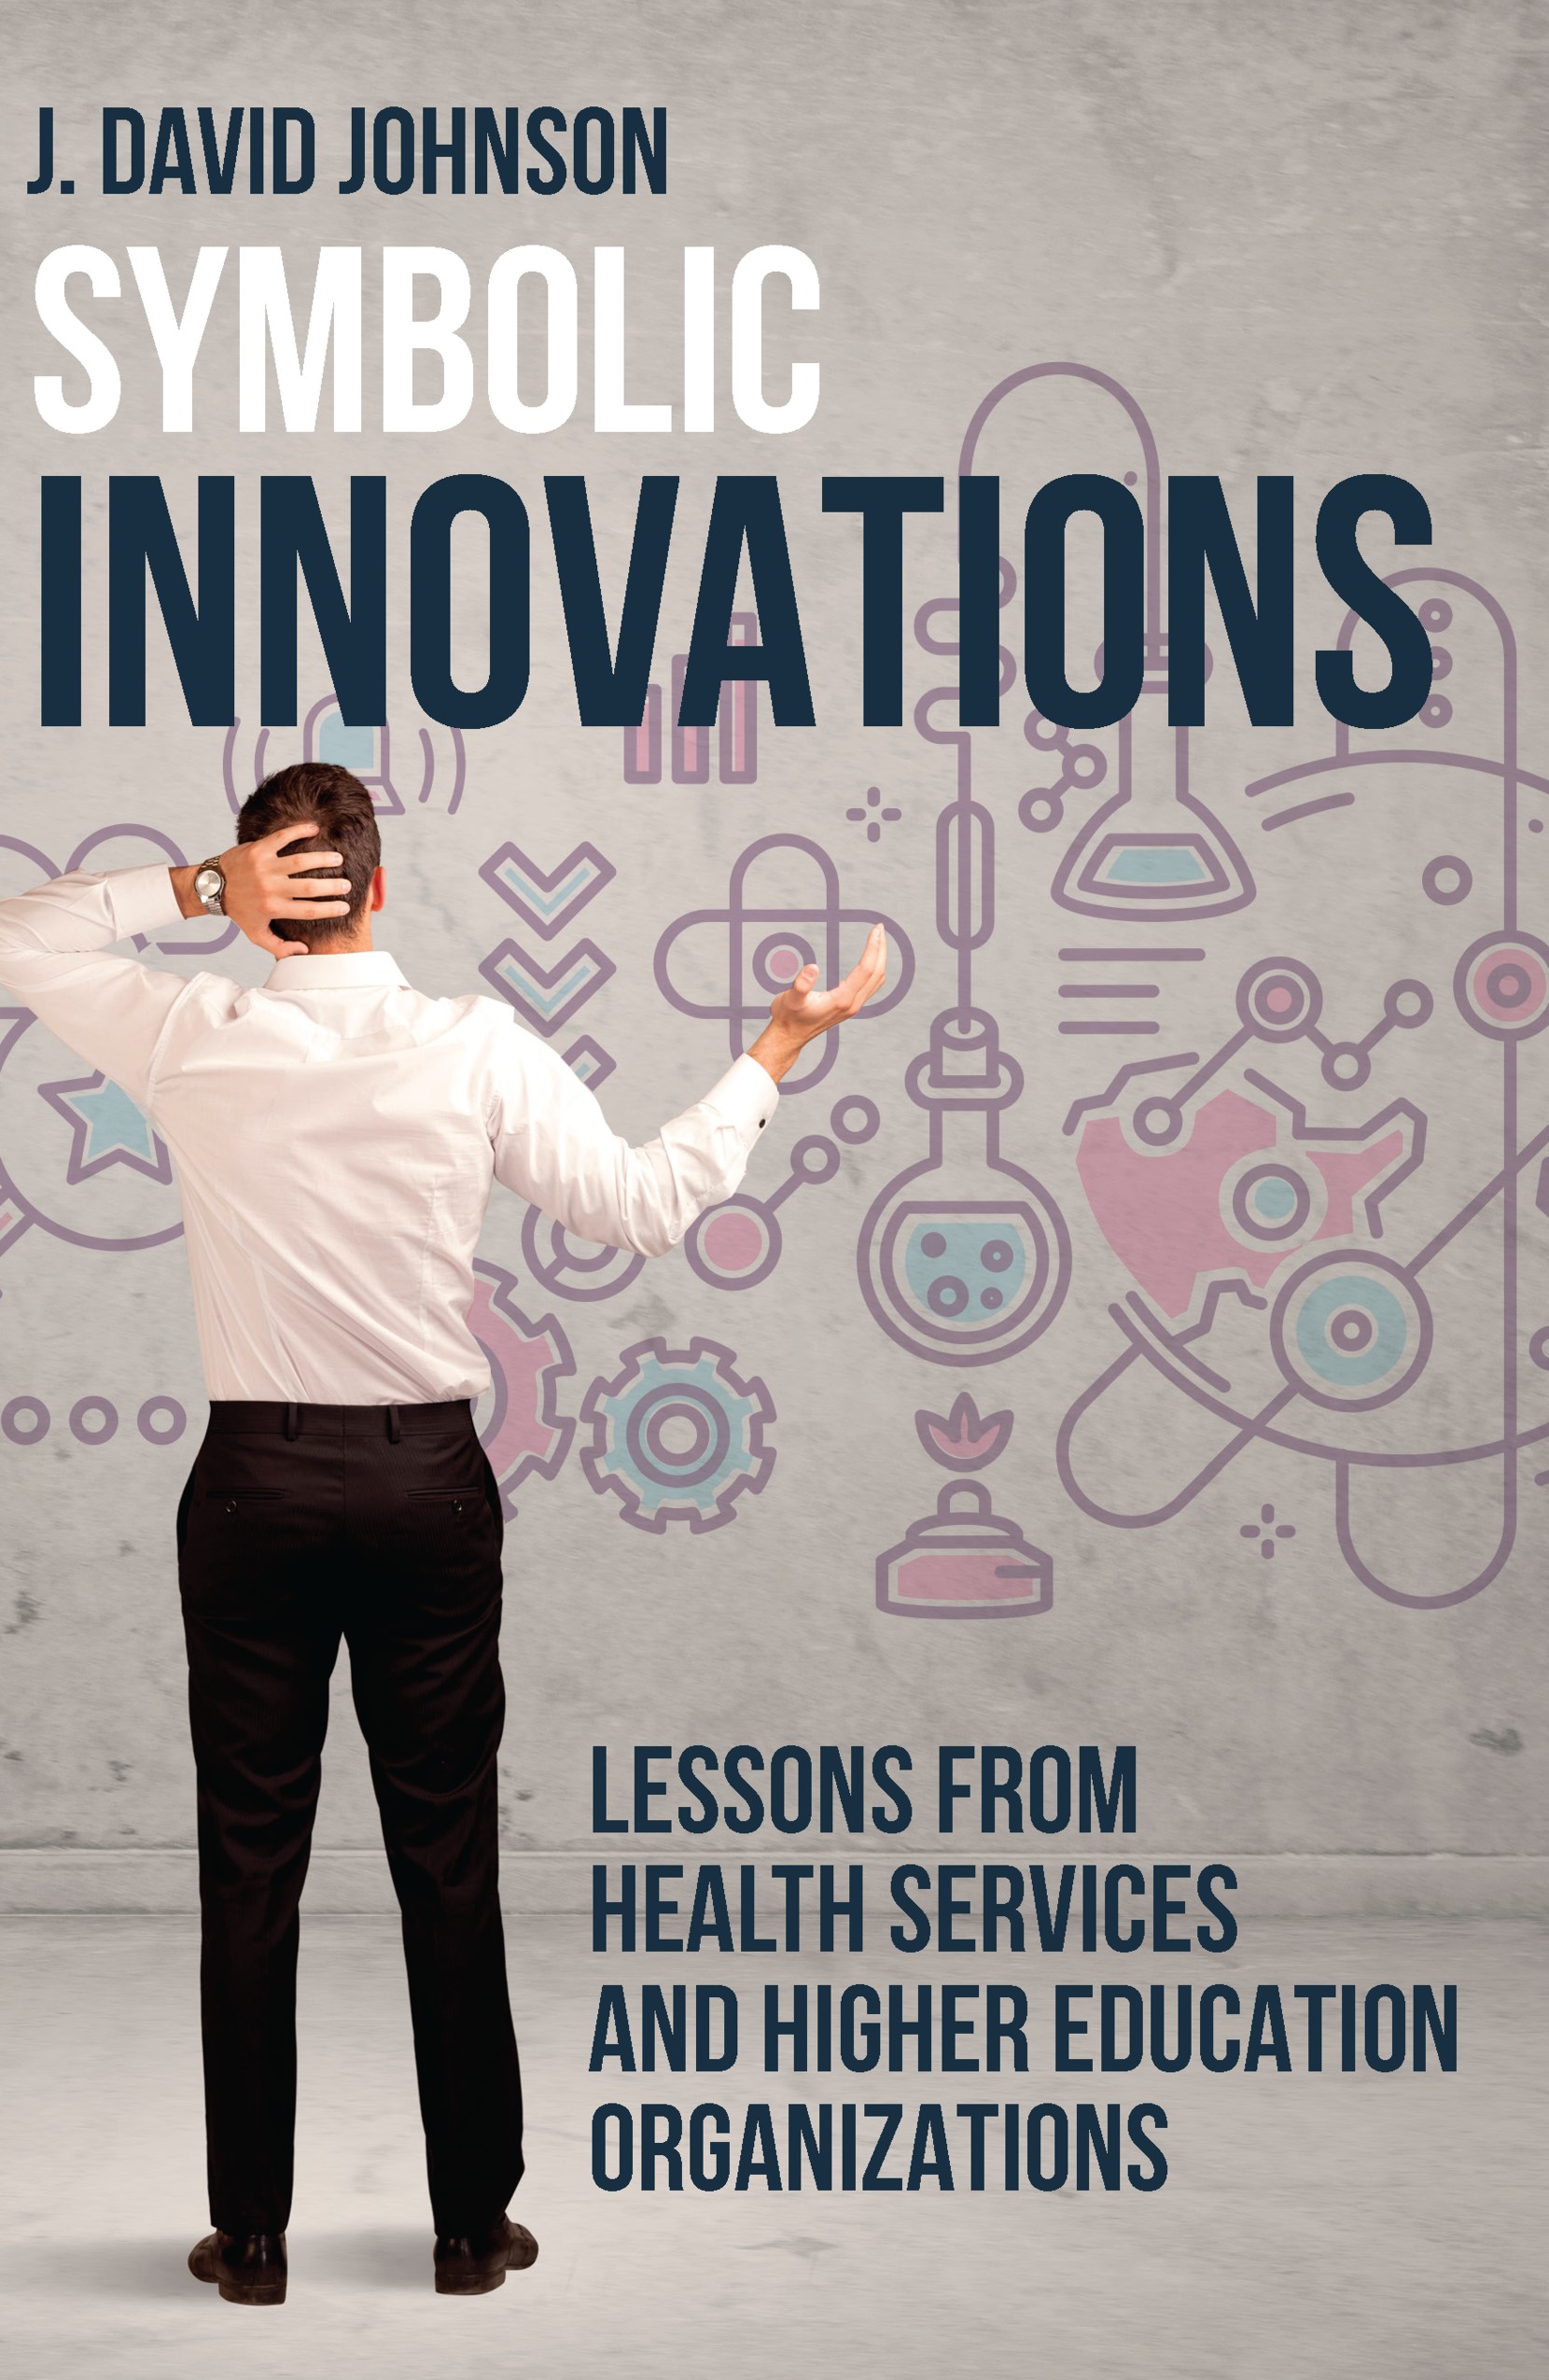 Symbolic Innovations: Lessons from Health Services and Higher Education Organizations (PBK)